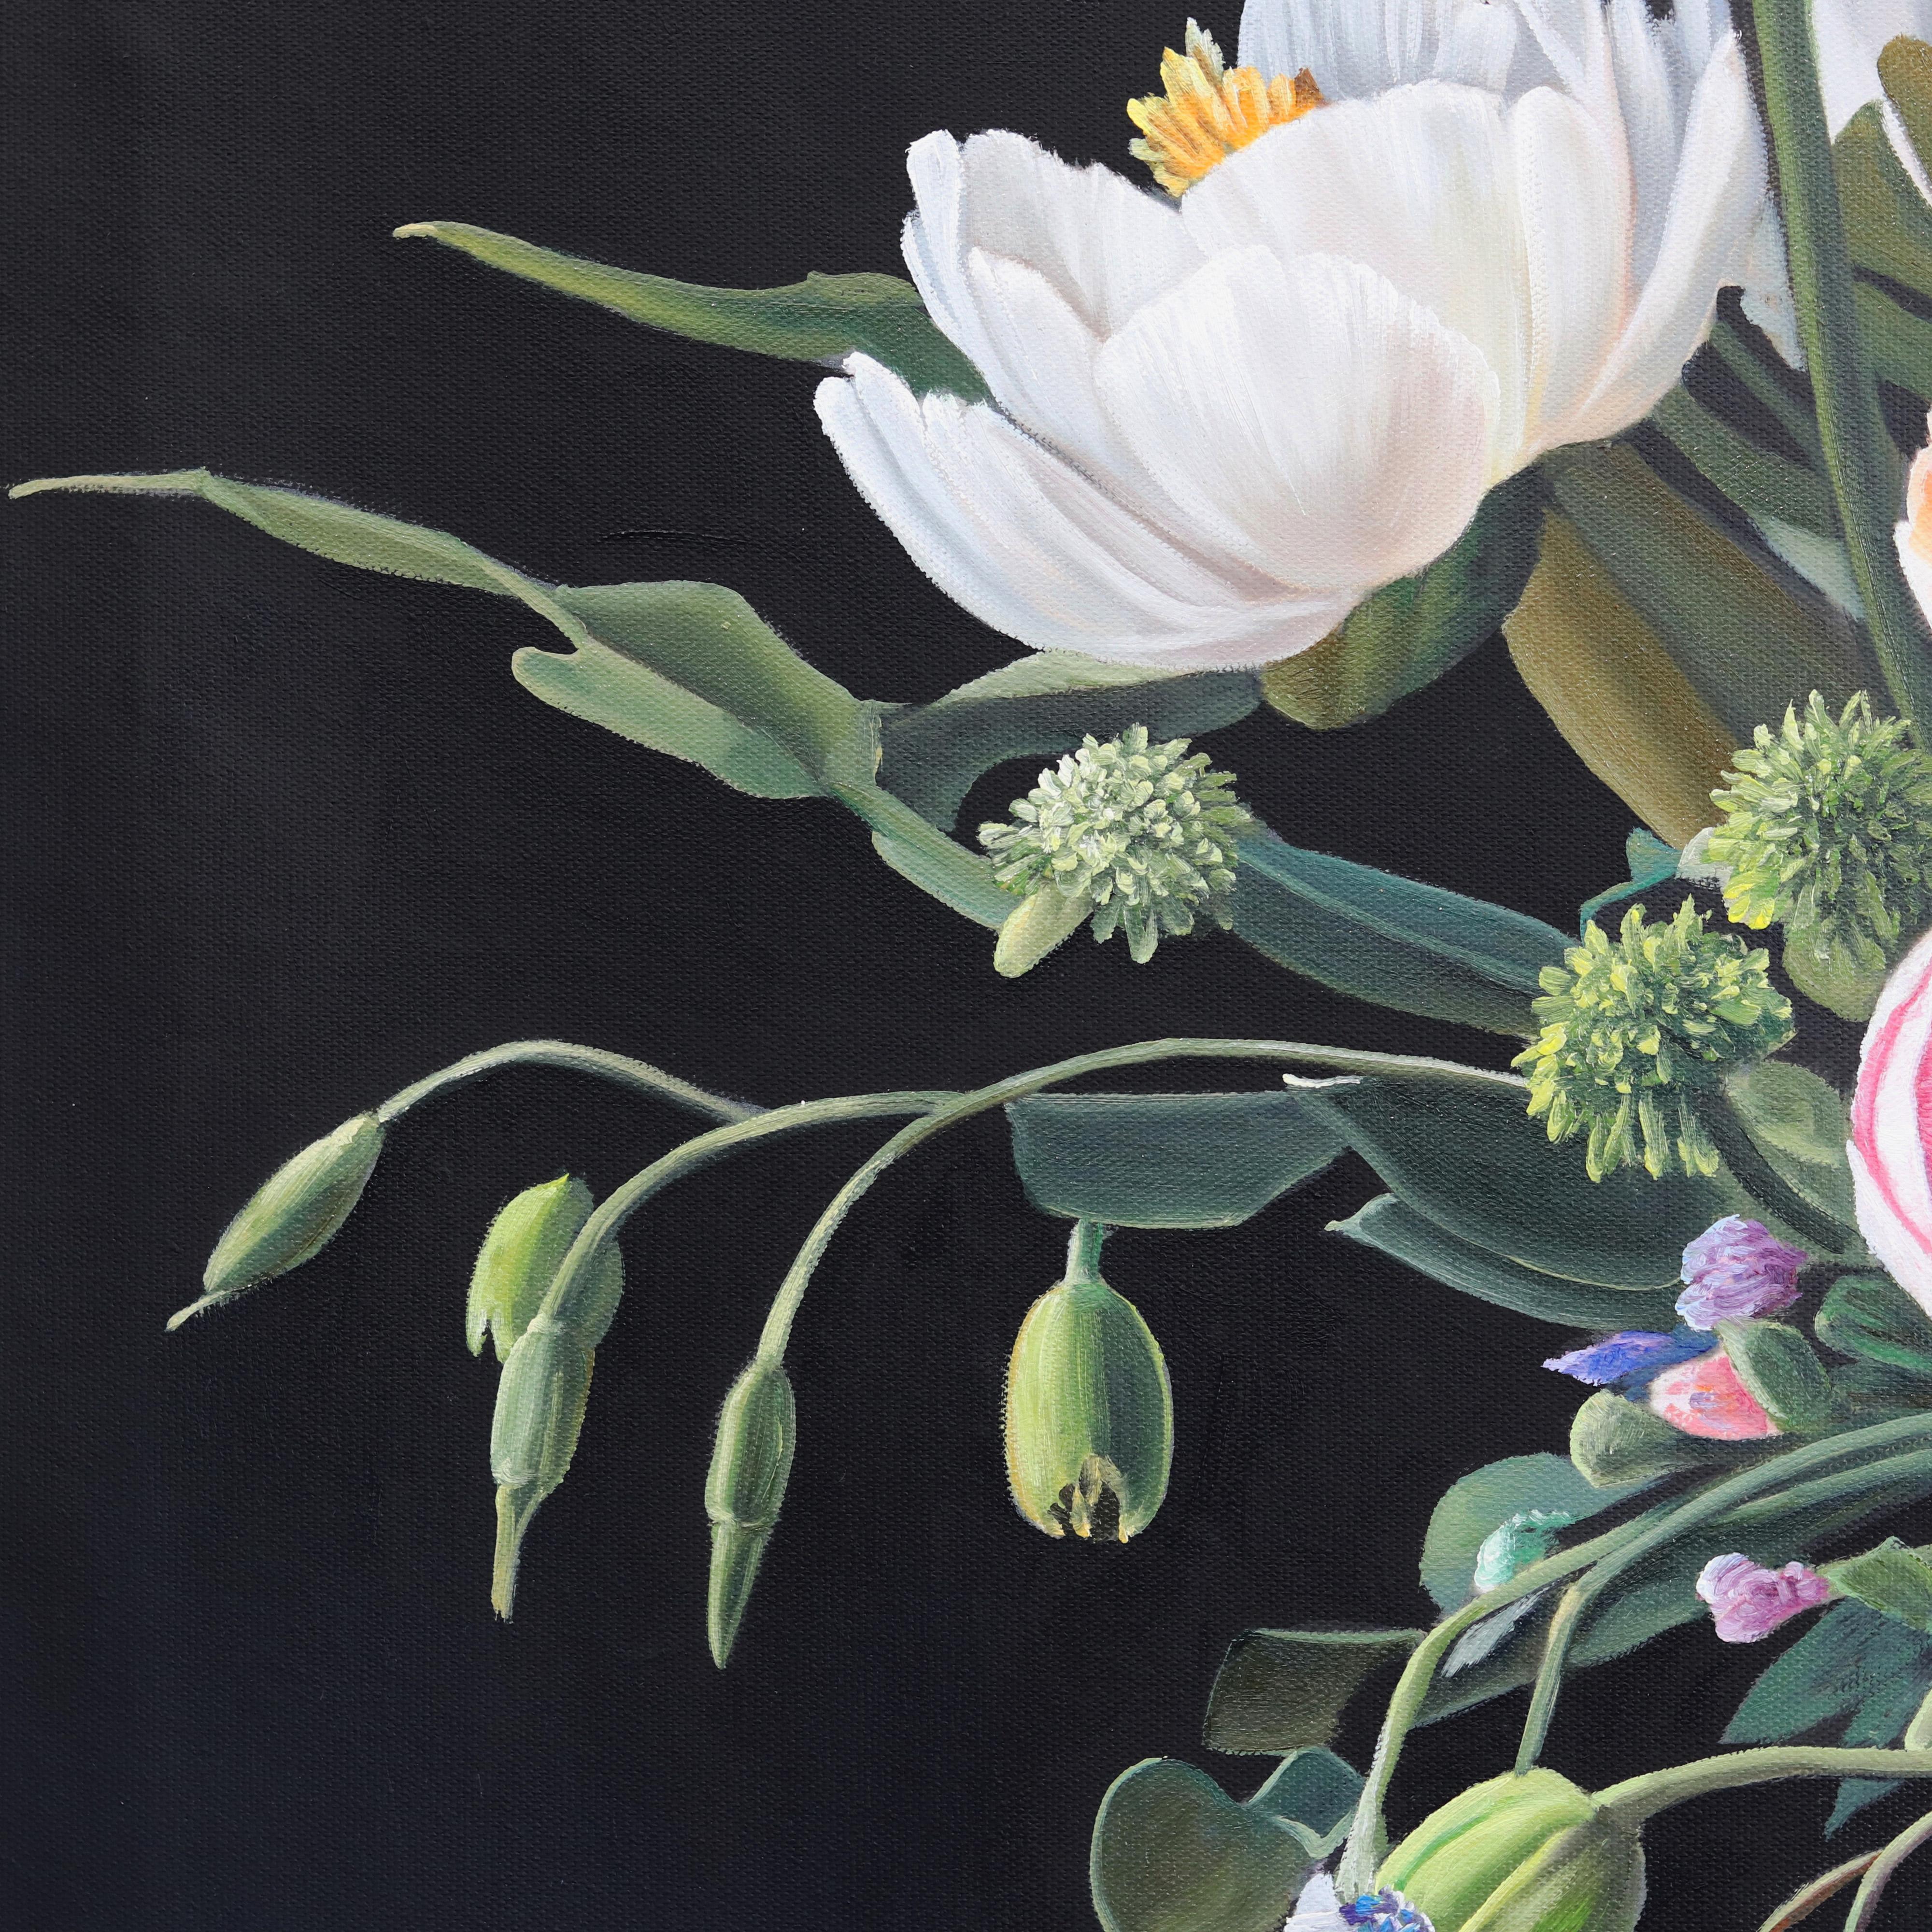 I Have Only My Dreams - Hyperrealist Botanical Floral Still Life Oil Painting 1